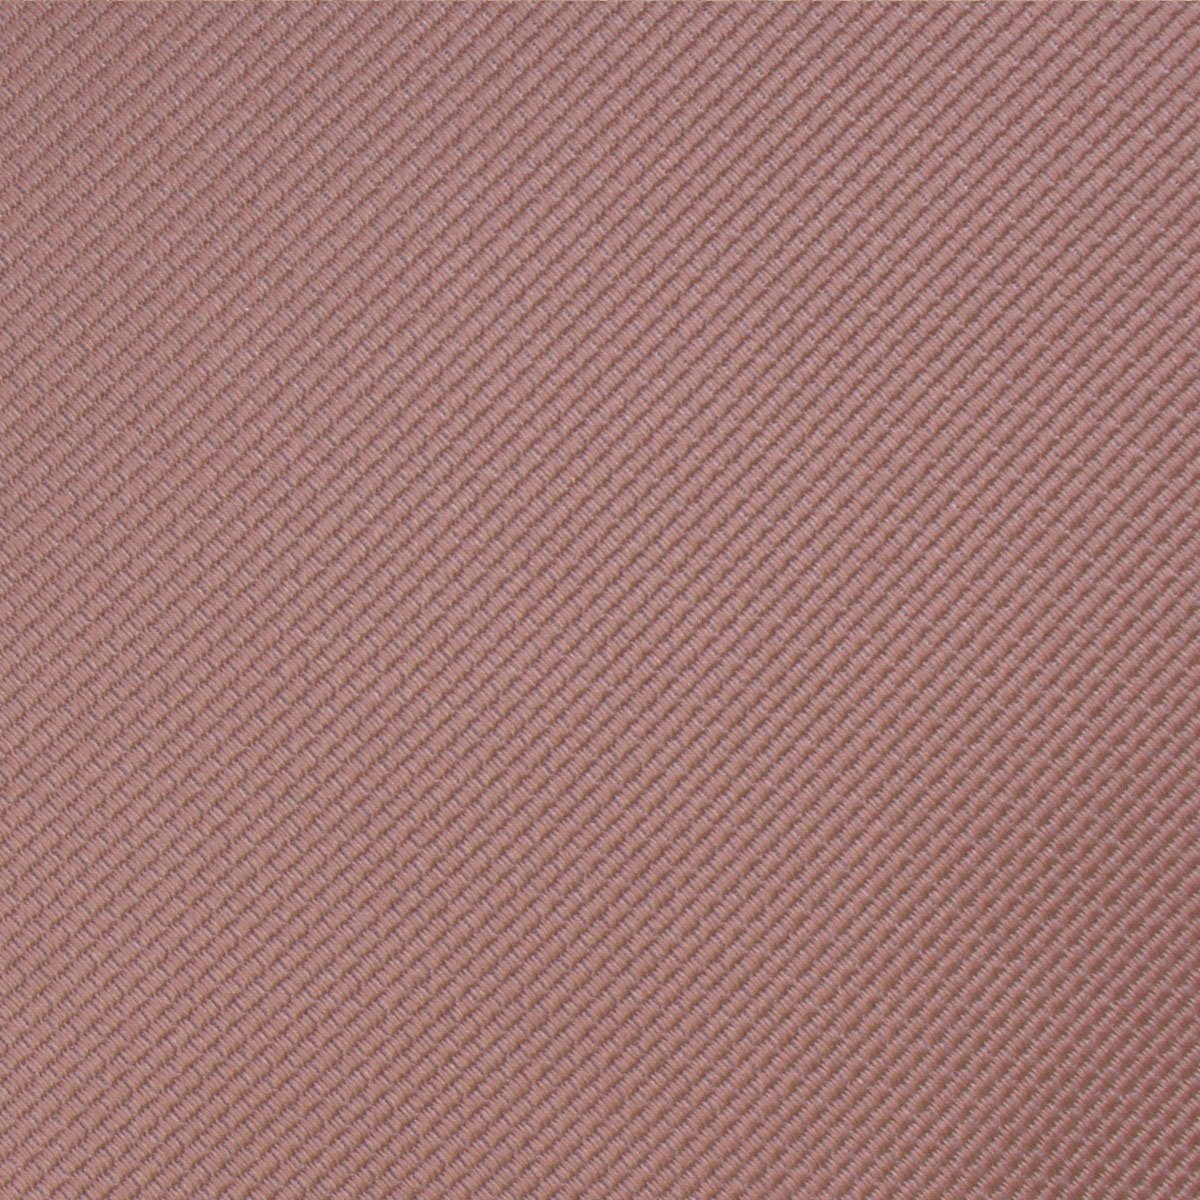 Antique Dusty Rose Weave Fabric Swatch